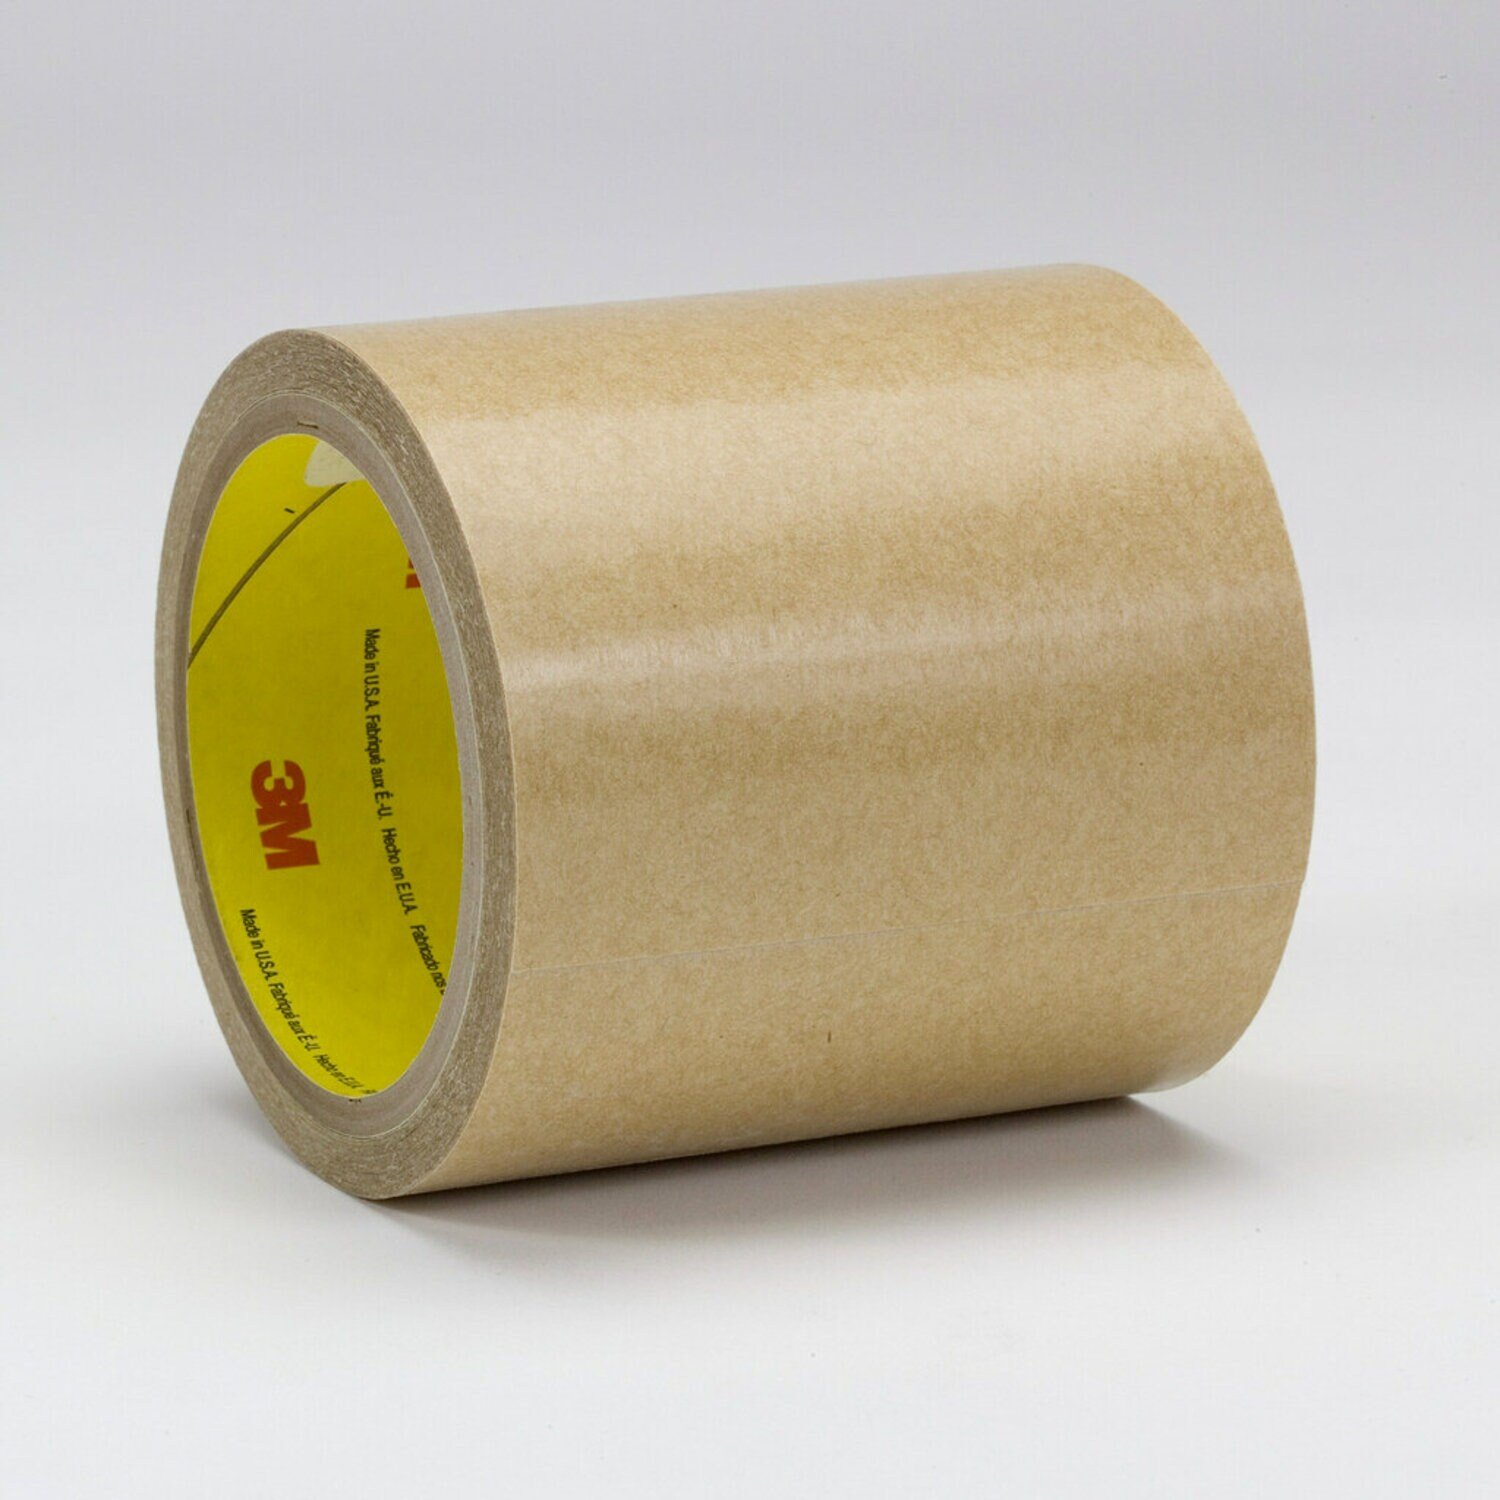 7100036714 - 3M Adhesive Transfer Tape 950, Clear, 1/2 in x 180 yd, 5 mil, 18 rolls
per case